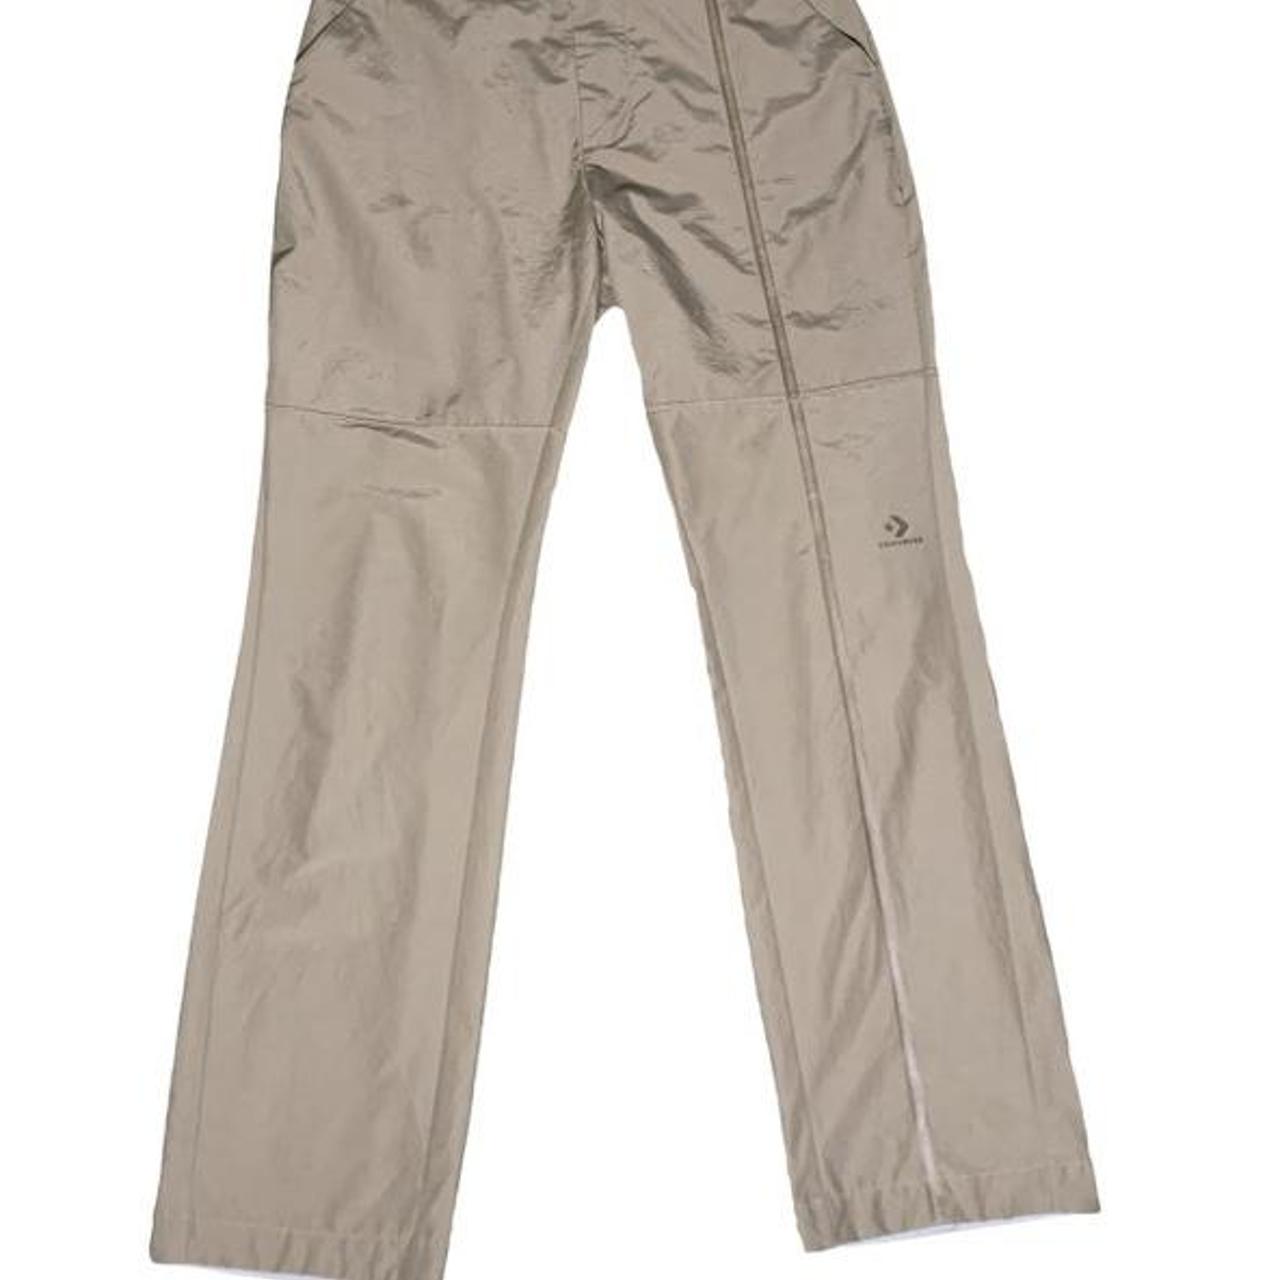 A-COLD-WALL Men's Trousers